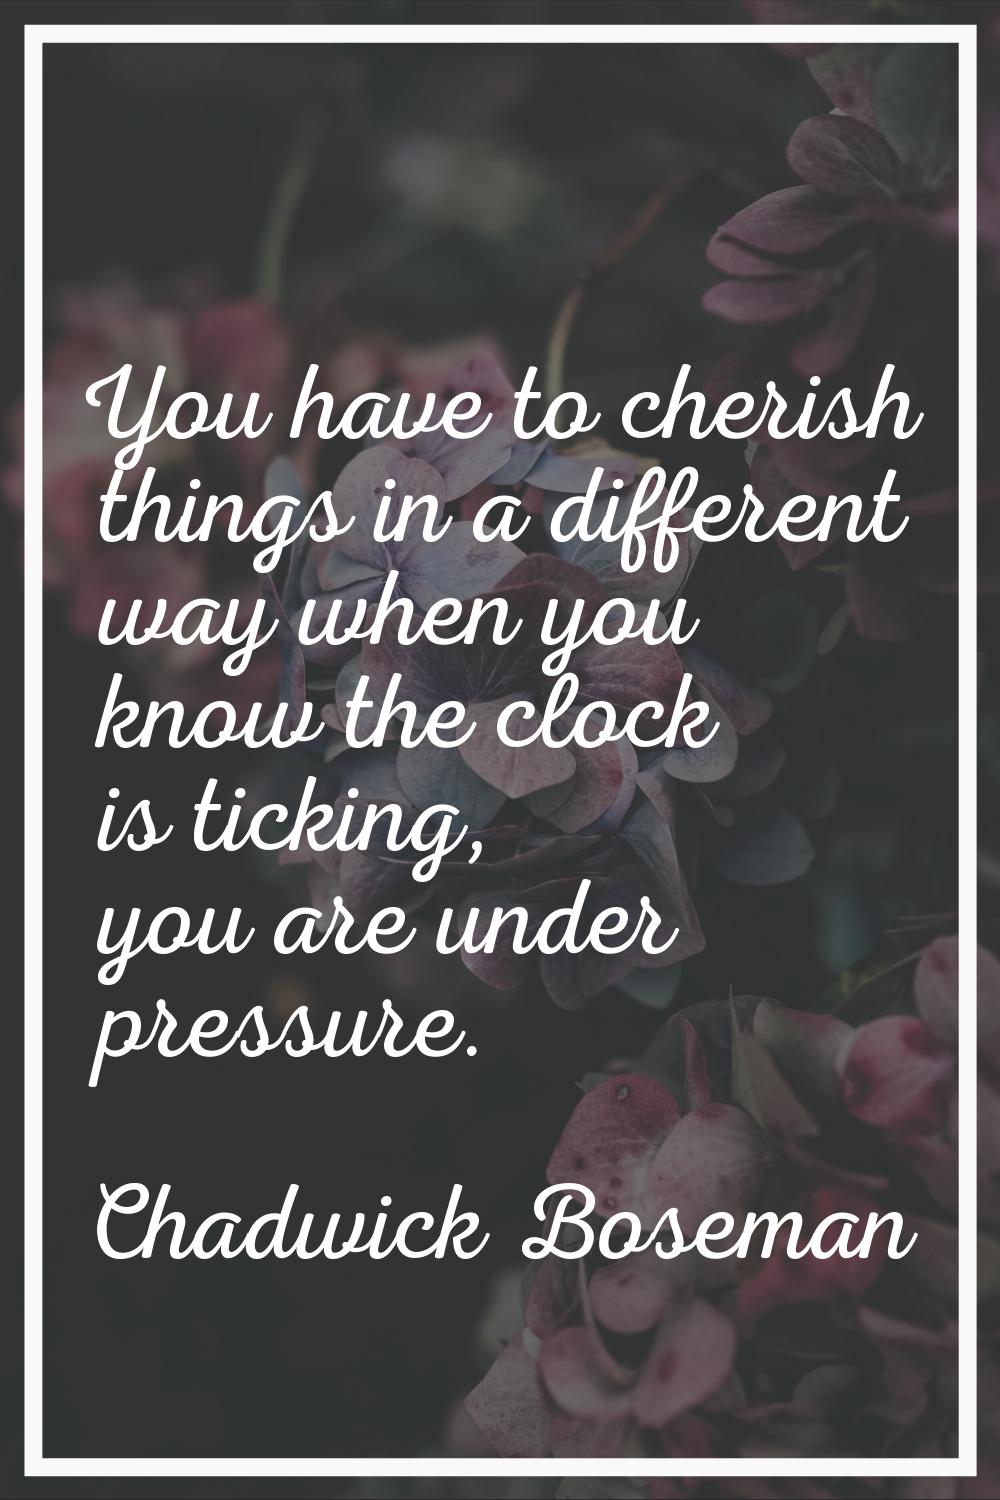 You have to cherish things in a different way when you know the clock is ticking, you are under pre